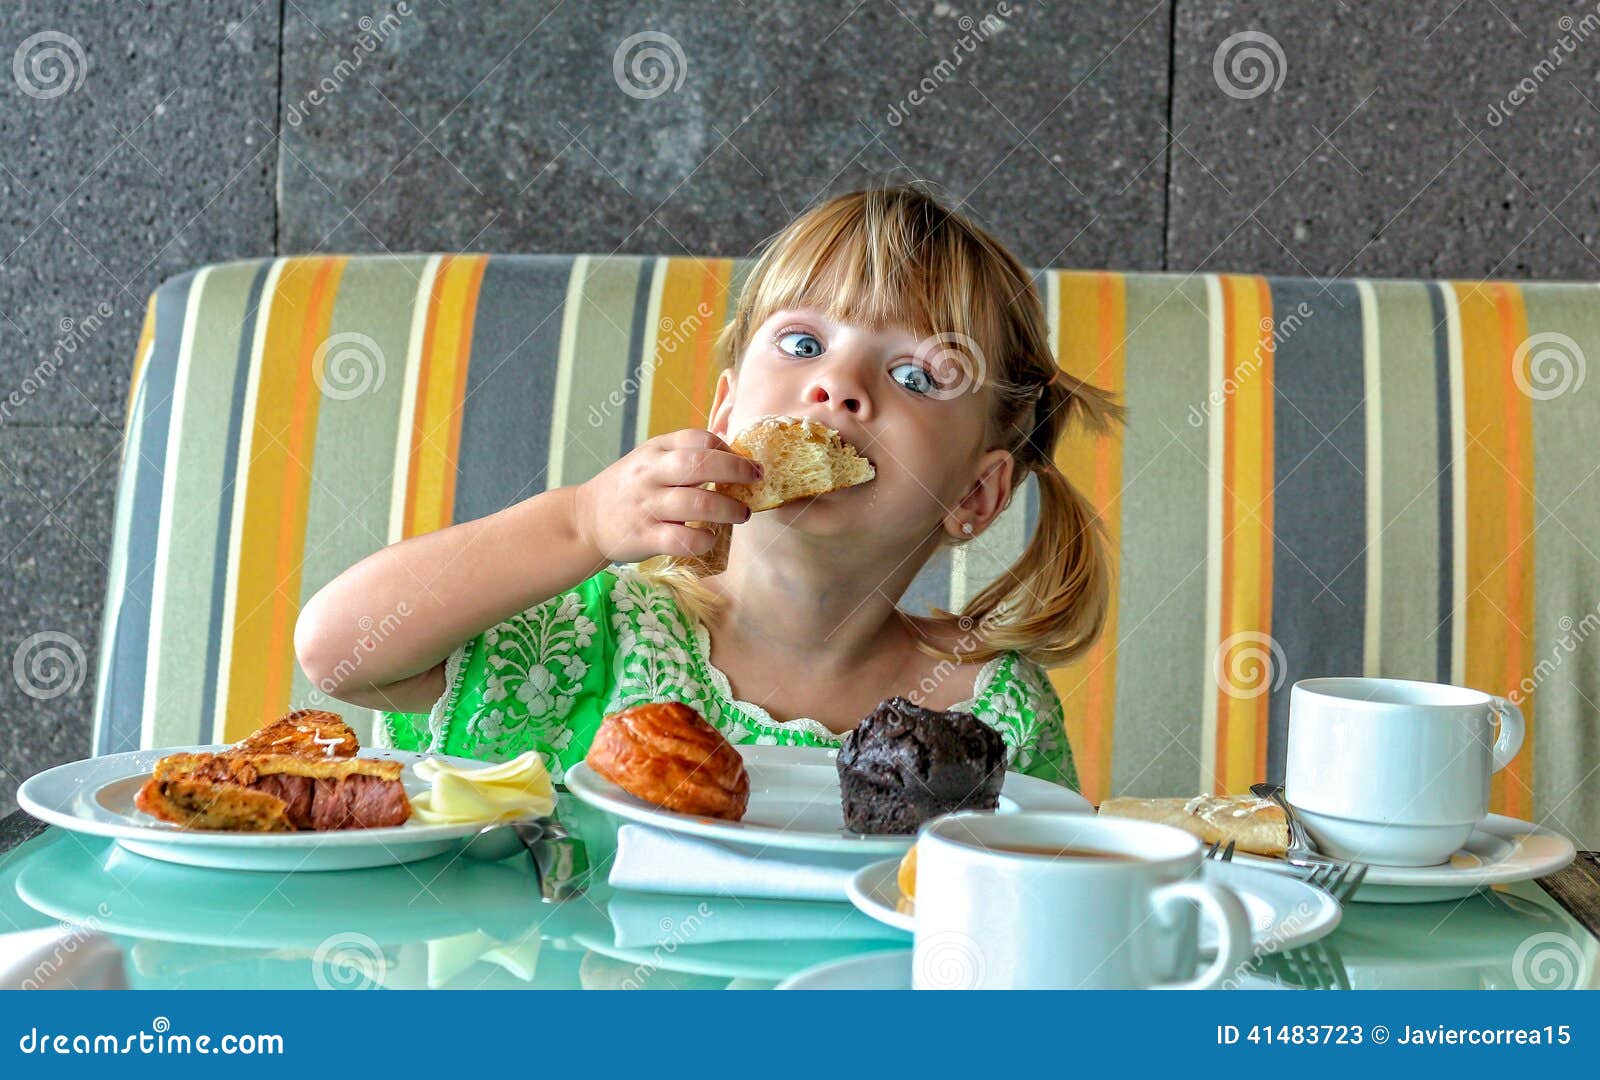 Funny Girl Eating Breakfast Stock Image - Image of happiness, chair